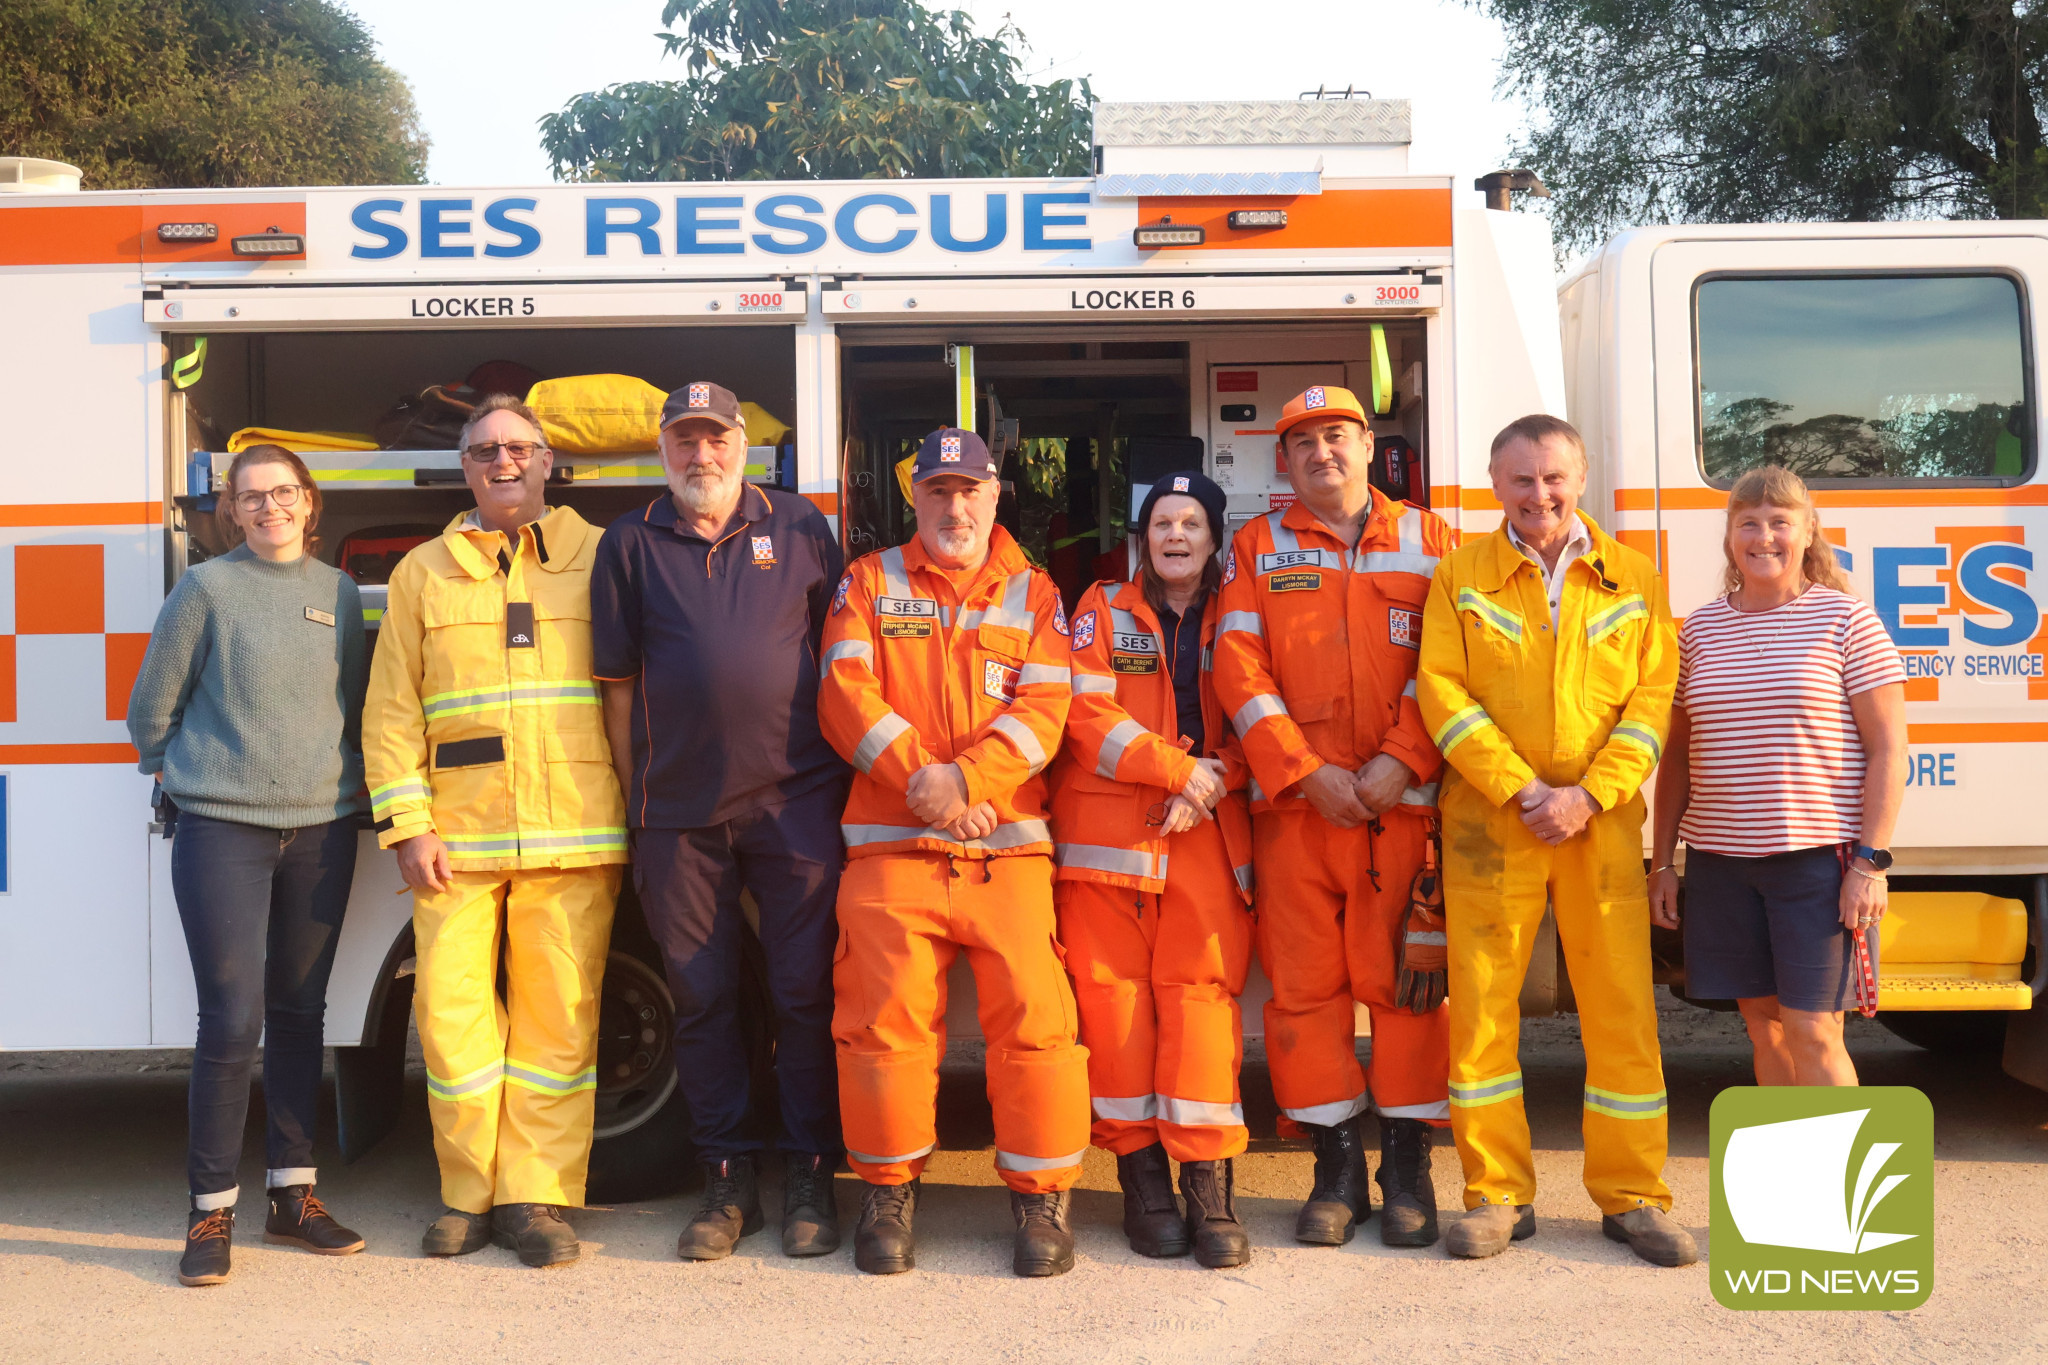 Preparing the community: SES Victoria members were joined by the Corangamite Shire Council and the CFA in raising awareness about flood preparedness in Skipton.